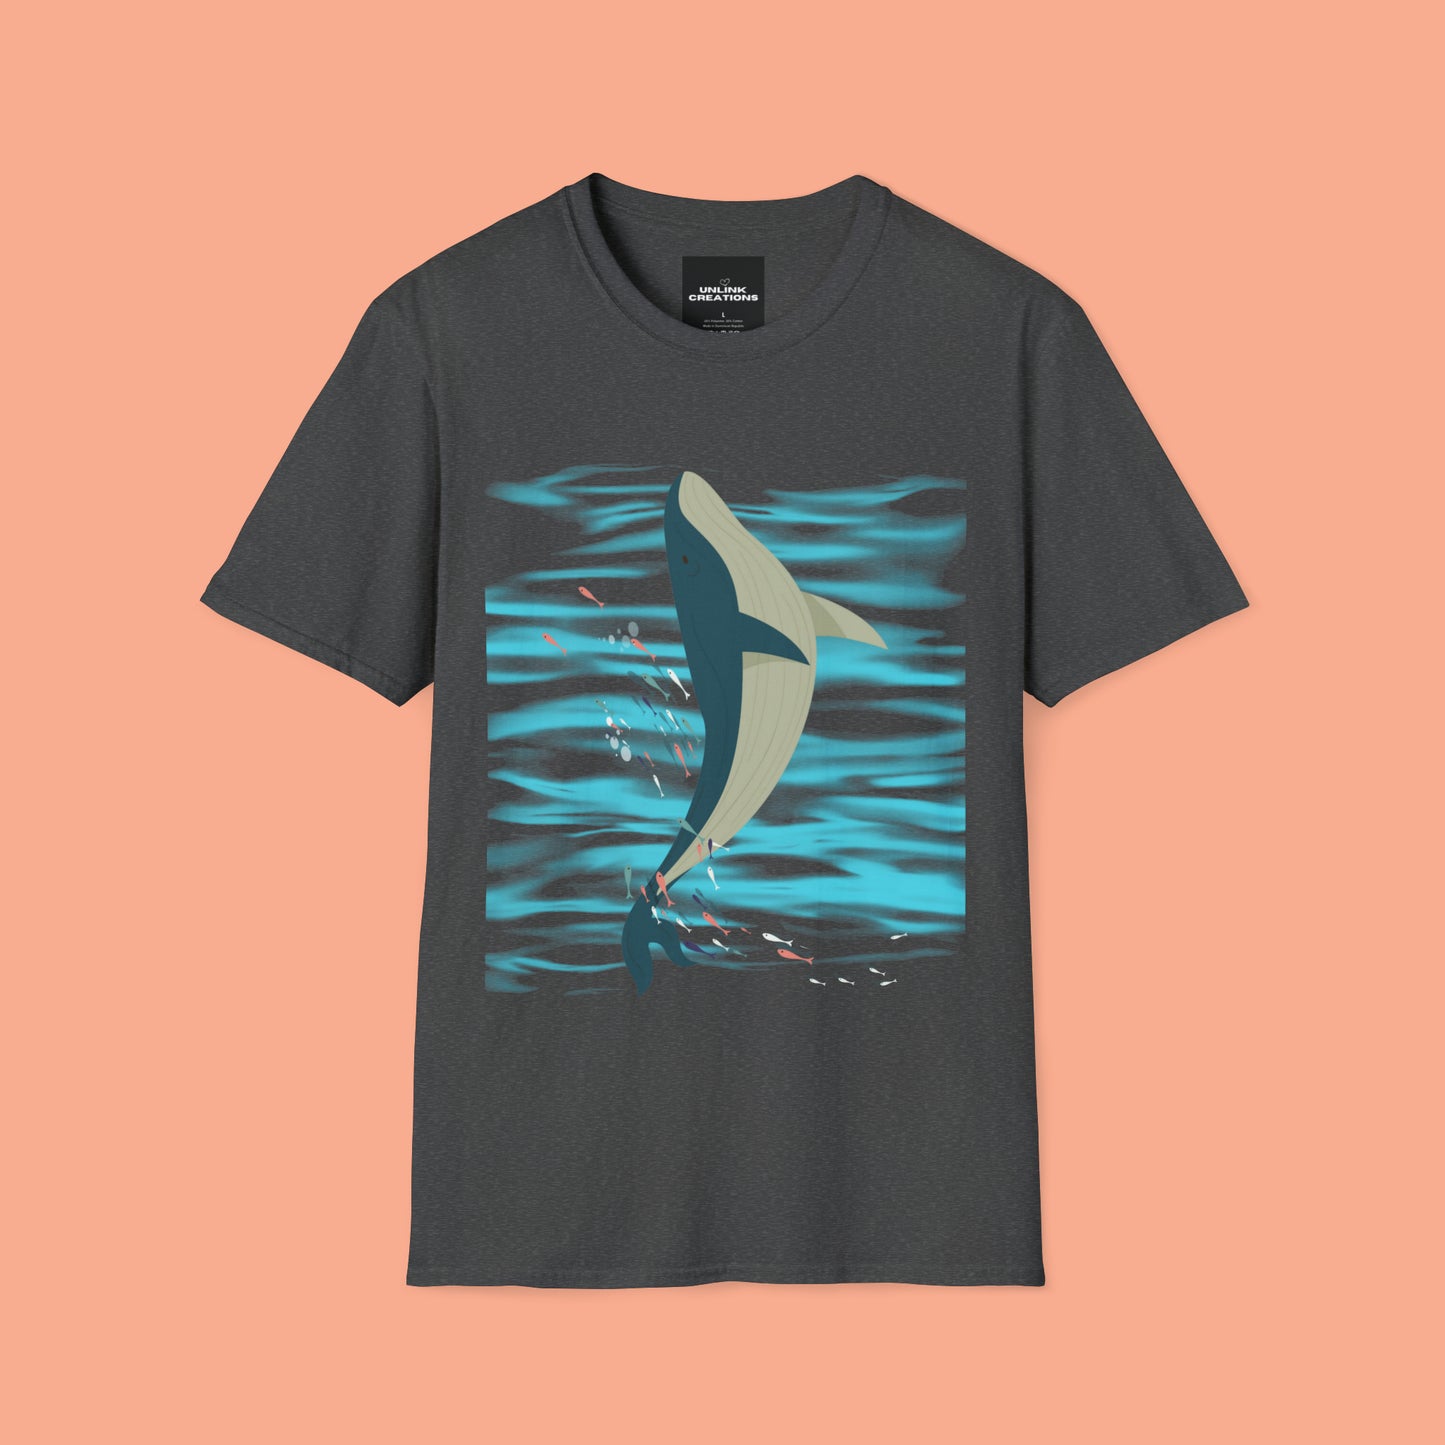 Love whales? Who doesn’t? These magnificent marine mammals are the largest animals to ever exist and some sing beautifully. They inspired this Unisex Softstyle T-Shirt design.